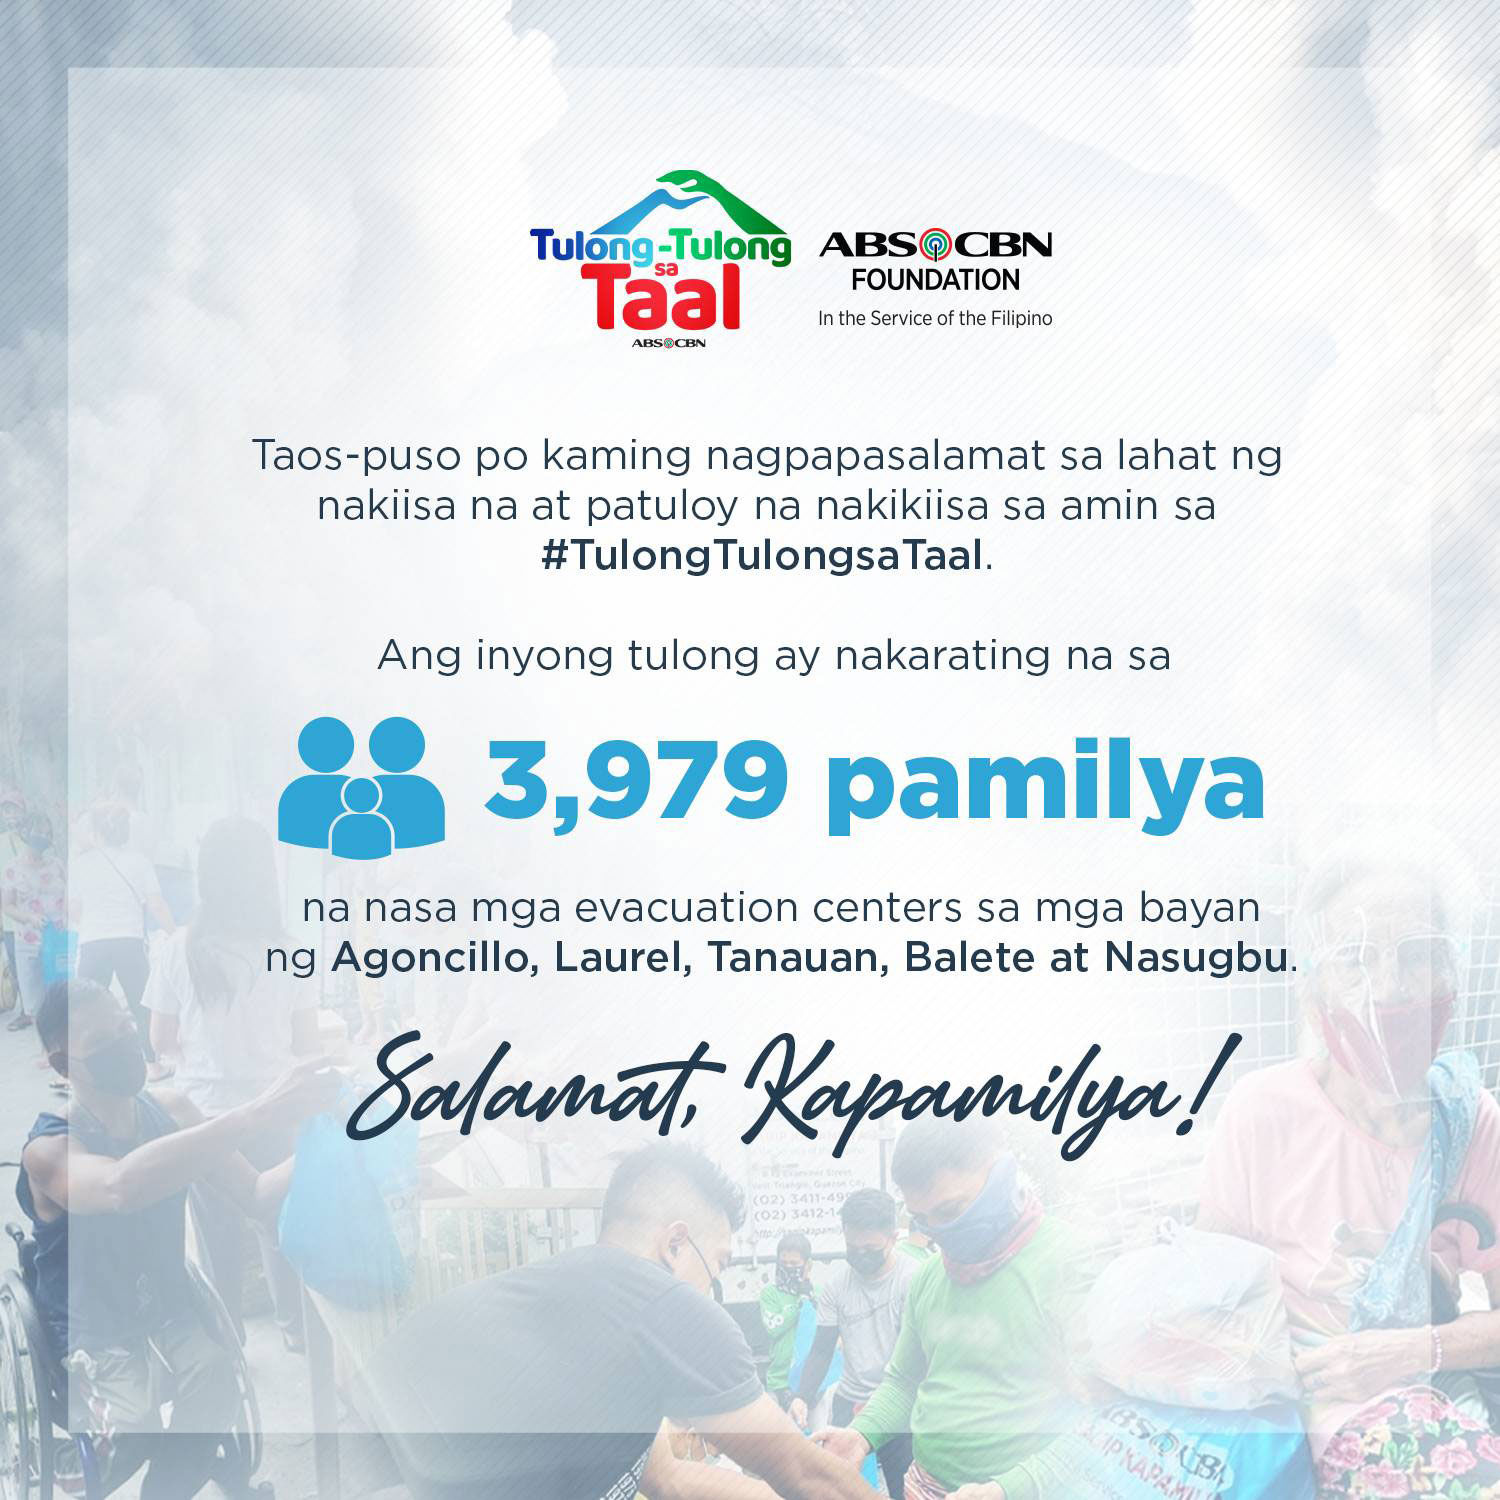 Tulong-tulong sa Taal: ABS-CBN Foundation provides relief to over 3,900 families 1